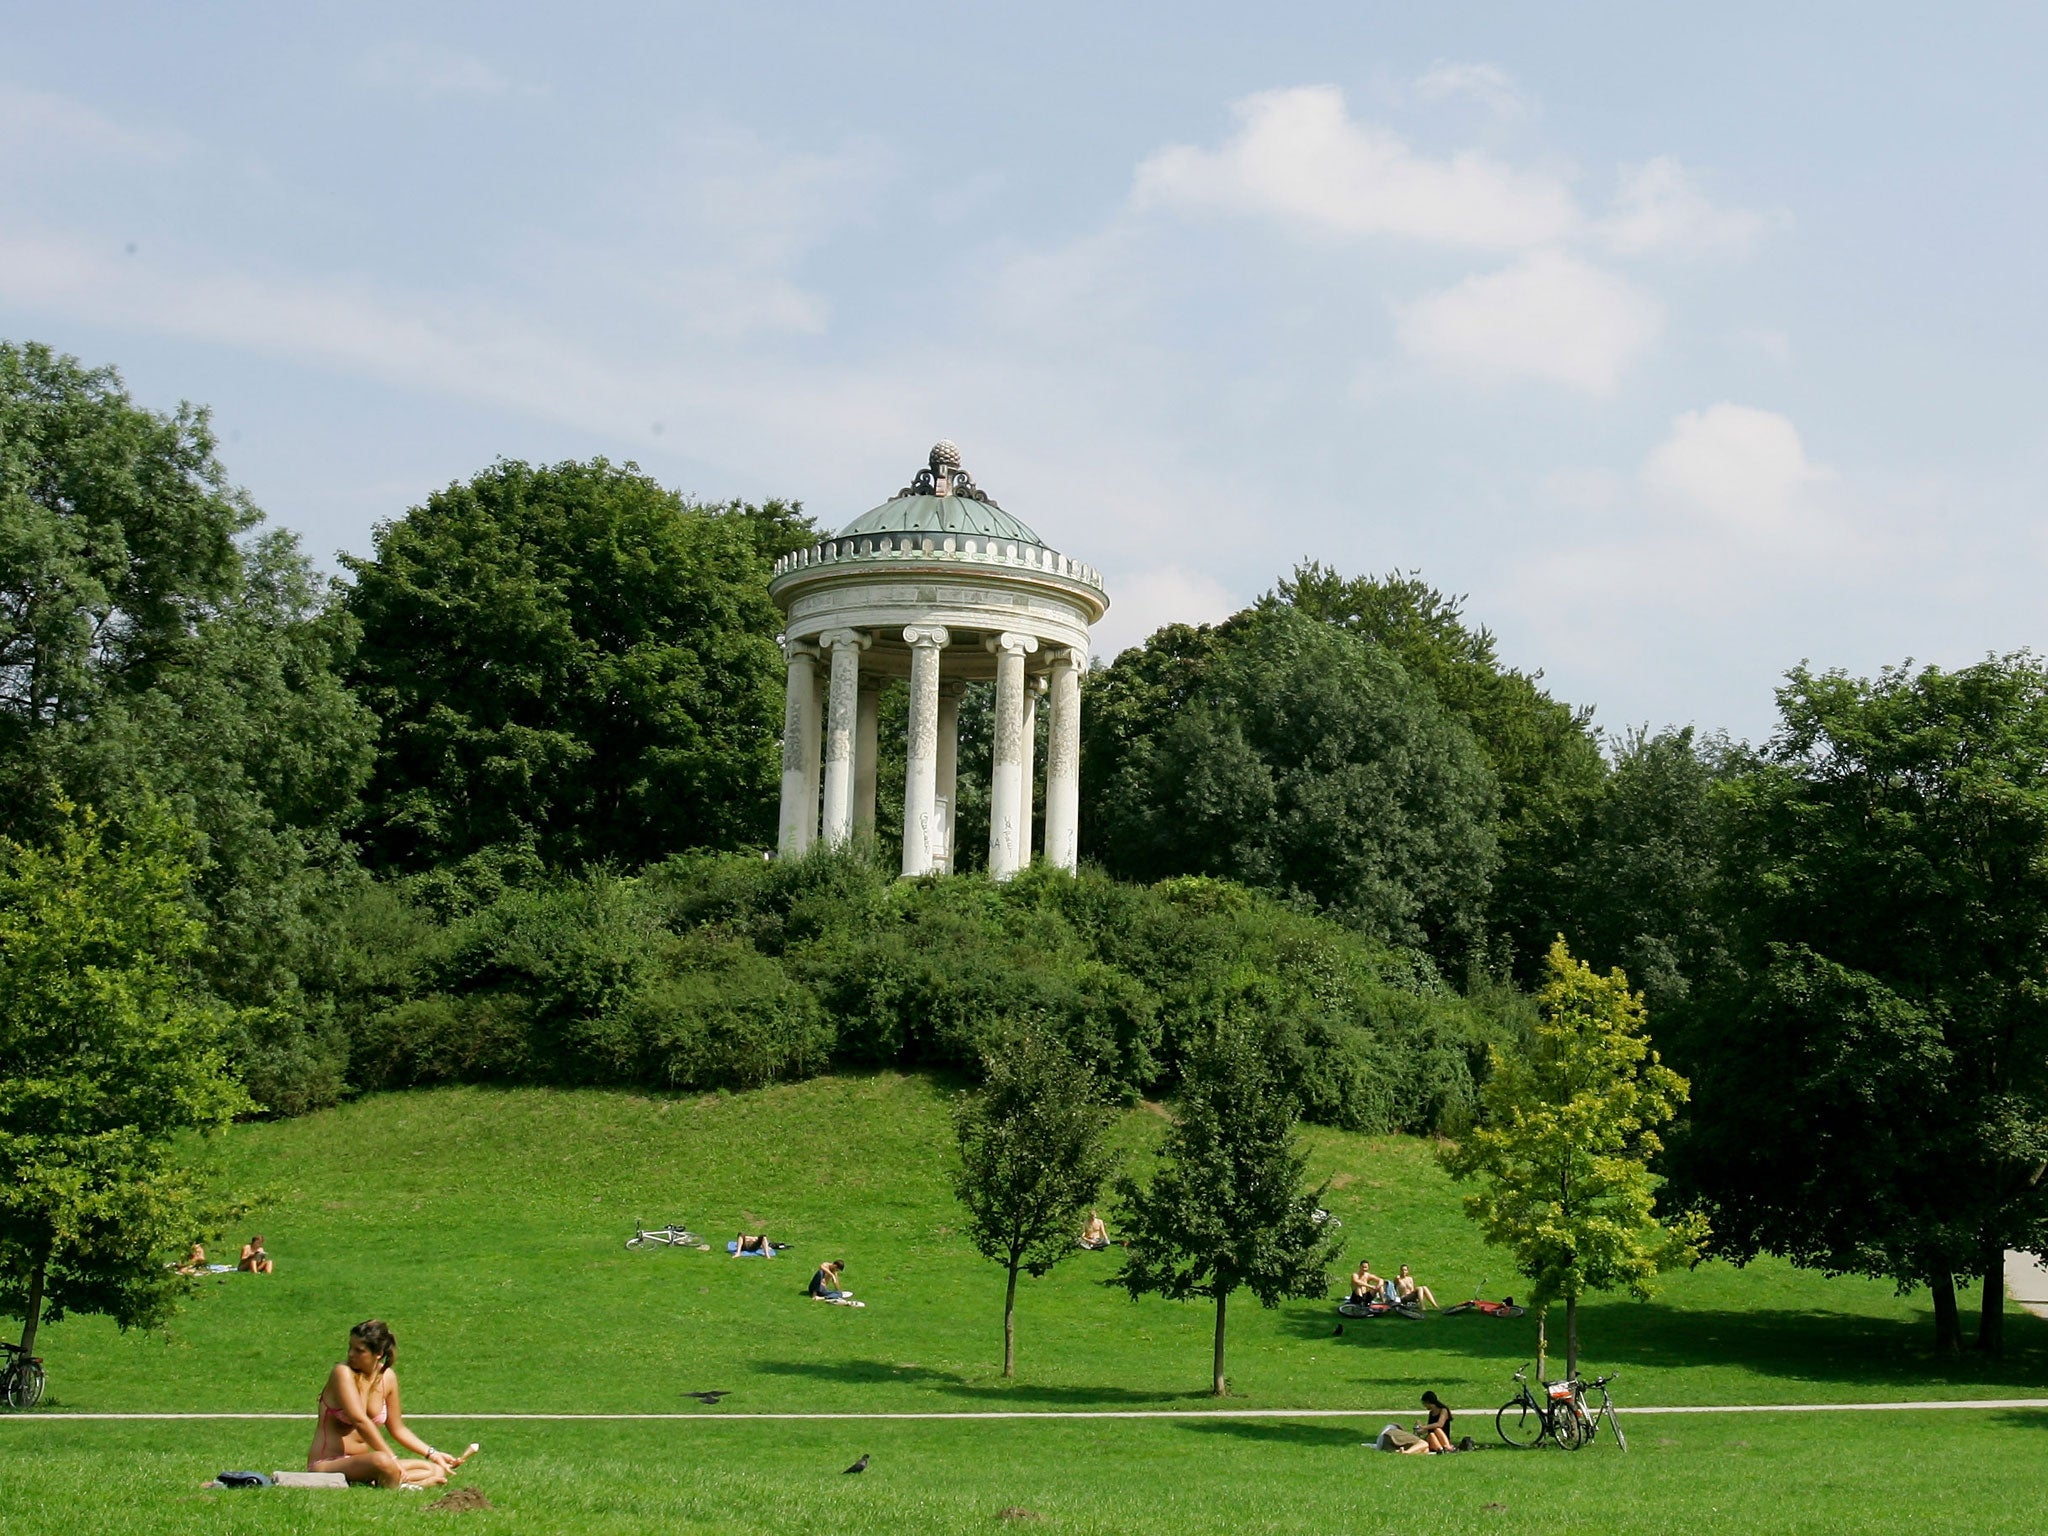 The Englischer Garten – one of the largest city parks in the world. Four other nudist zones will be located along the Isar River and will not be obscured or fenced off, according to the site.